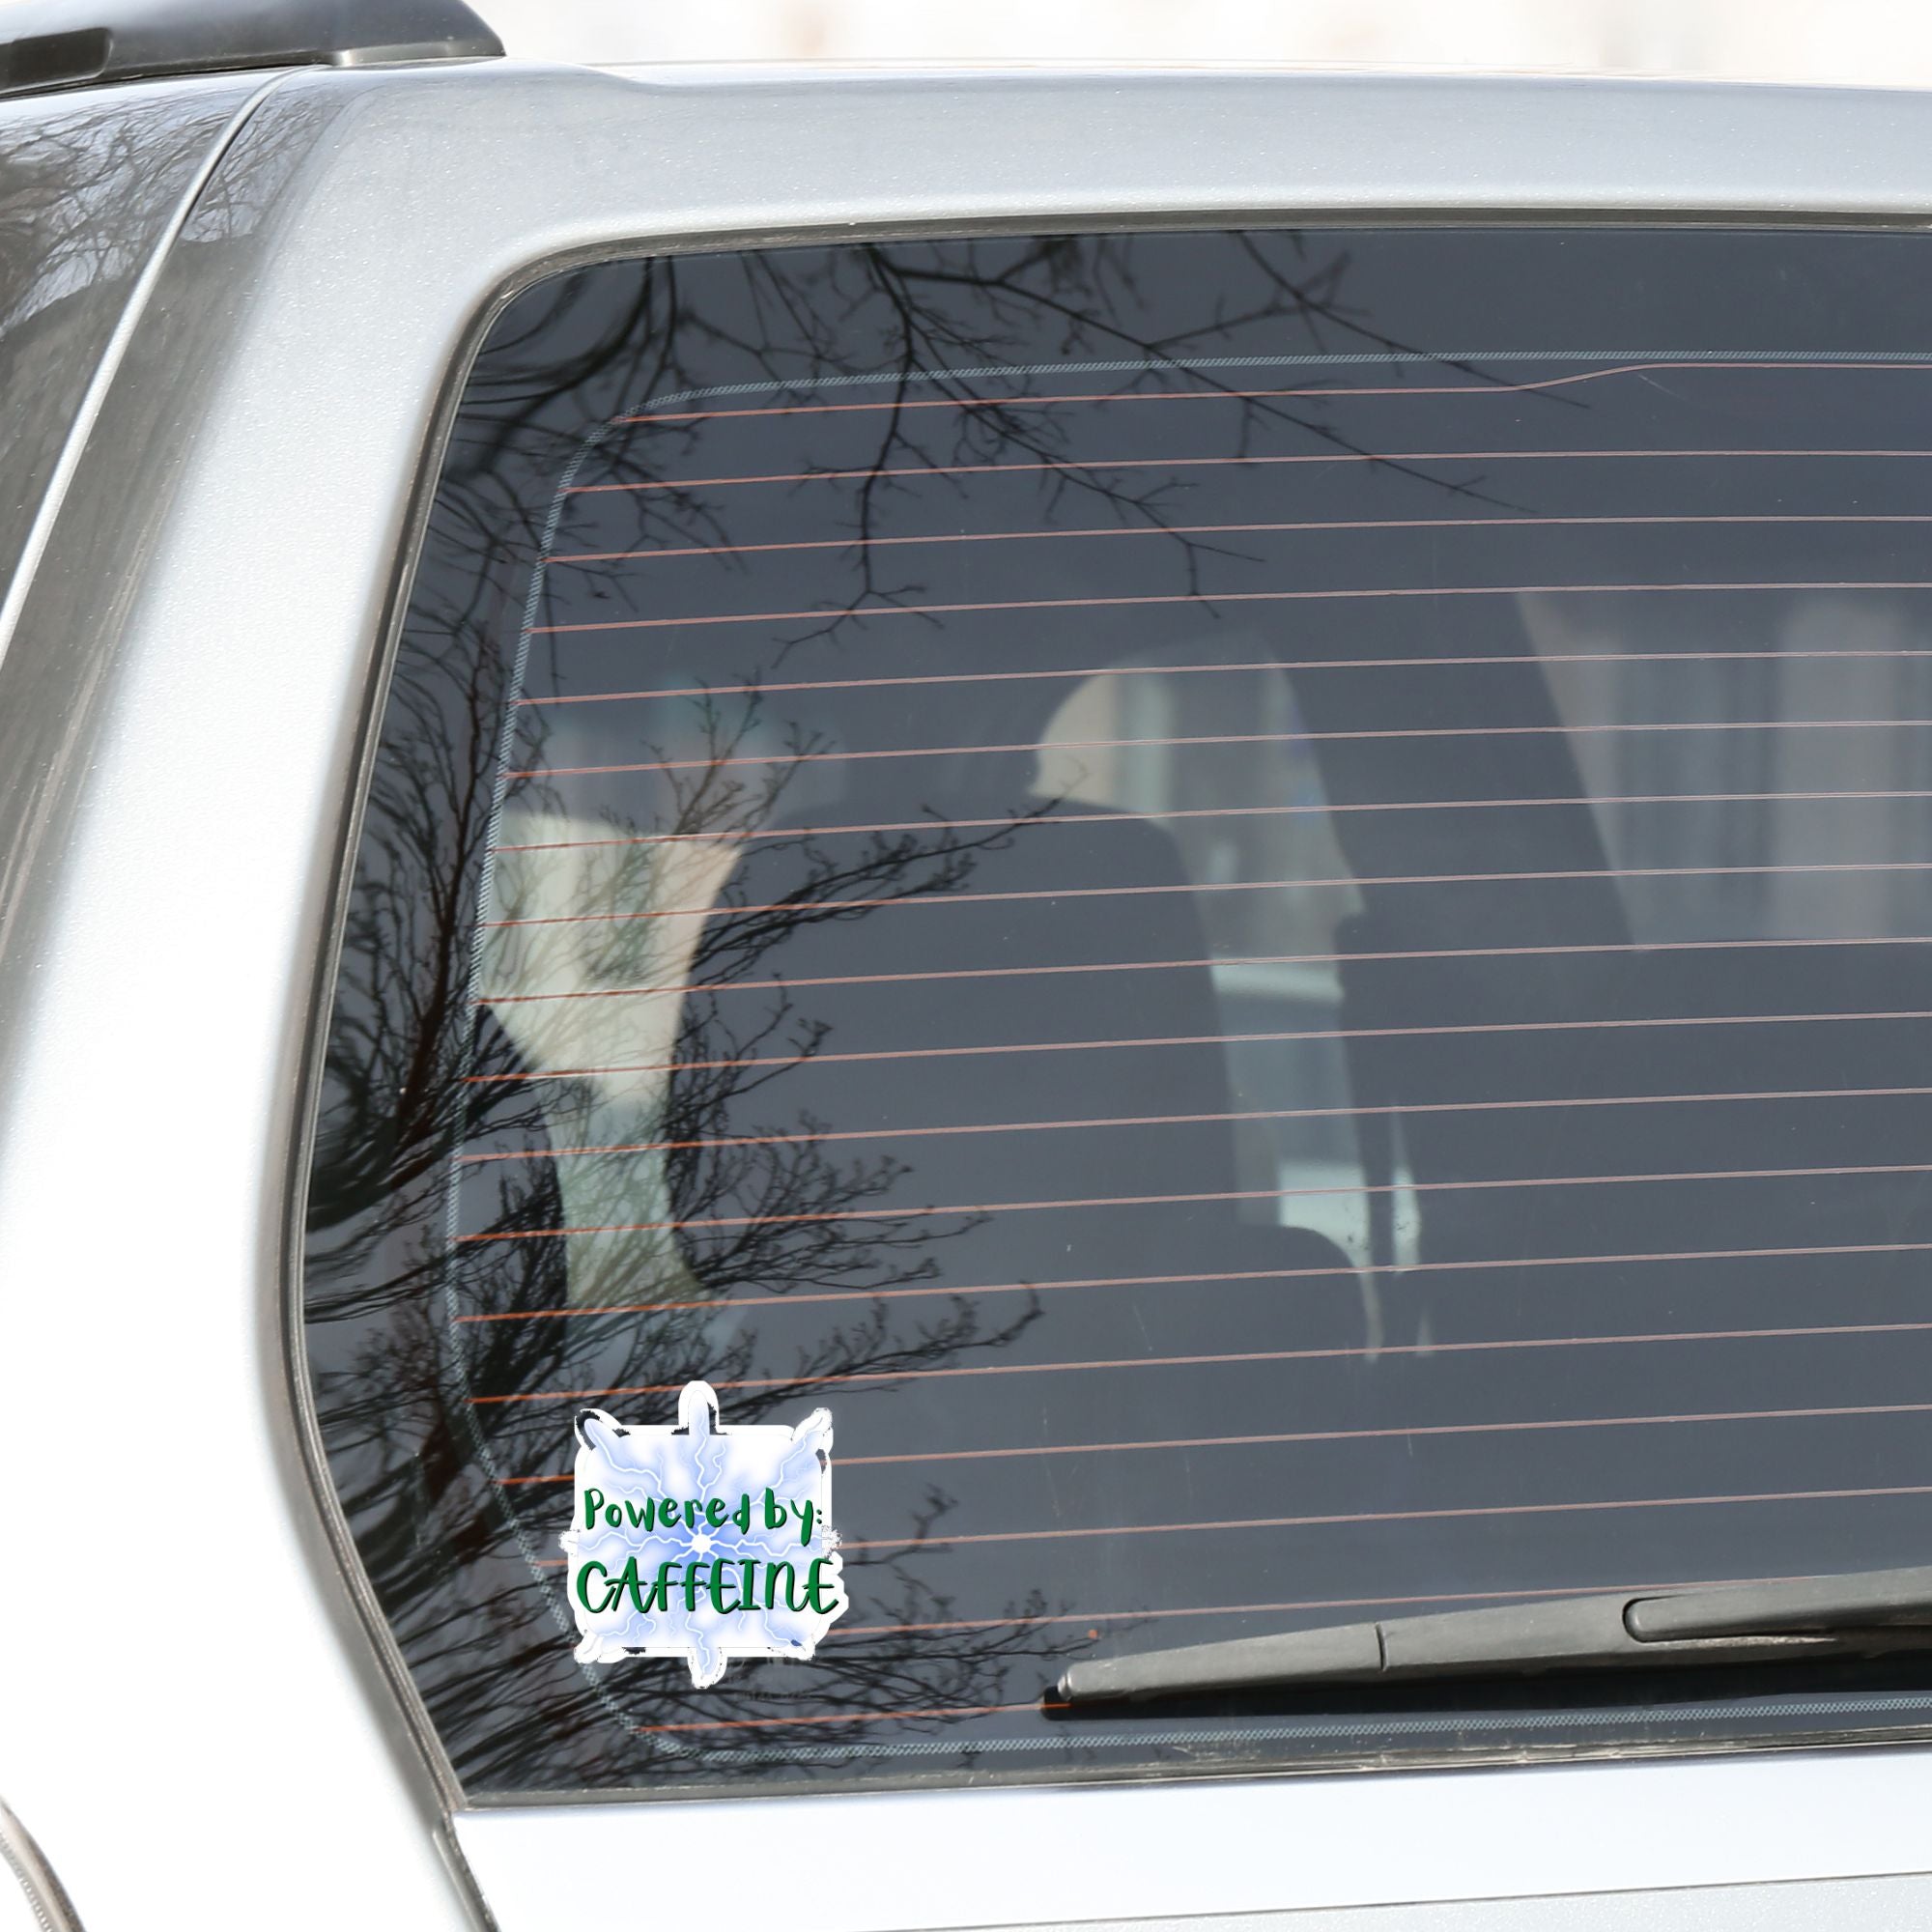 For those who like it, caffeine can be the magic elixir! This individual die-cut sticker has the words Powered by CAFFEINE in green over a background of blue electric/lightning bolts. This image shows the Powered by Caffeine sticker on the back window of a car. 